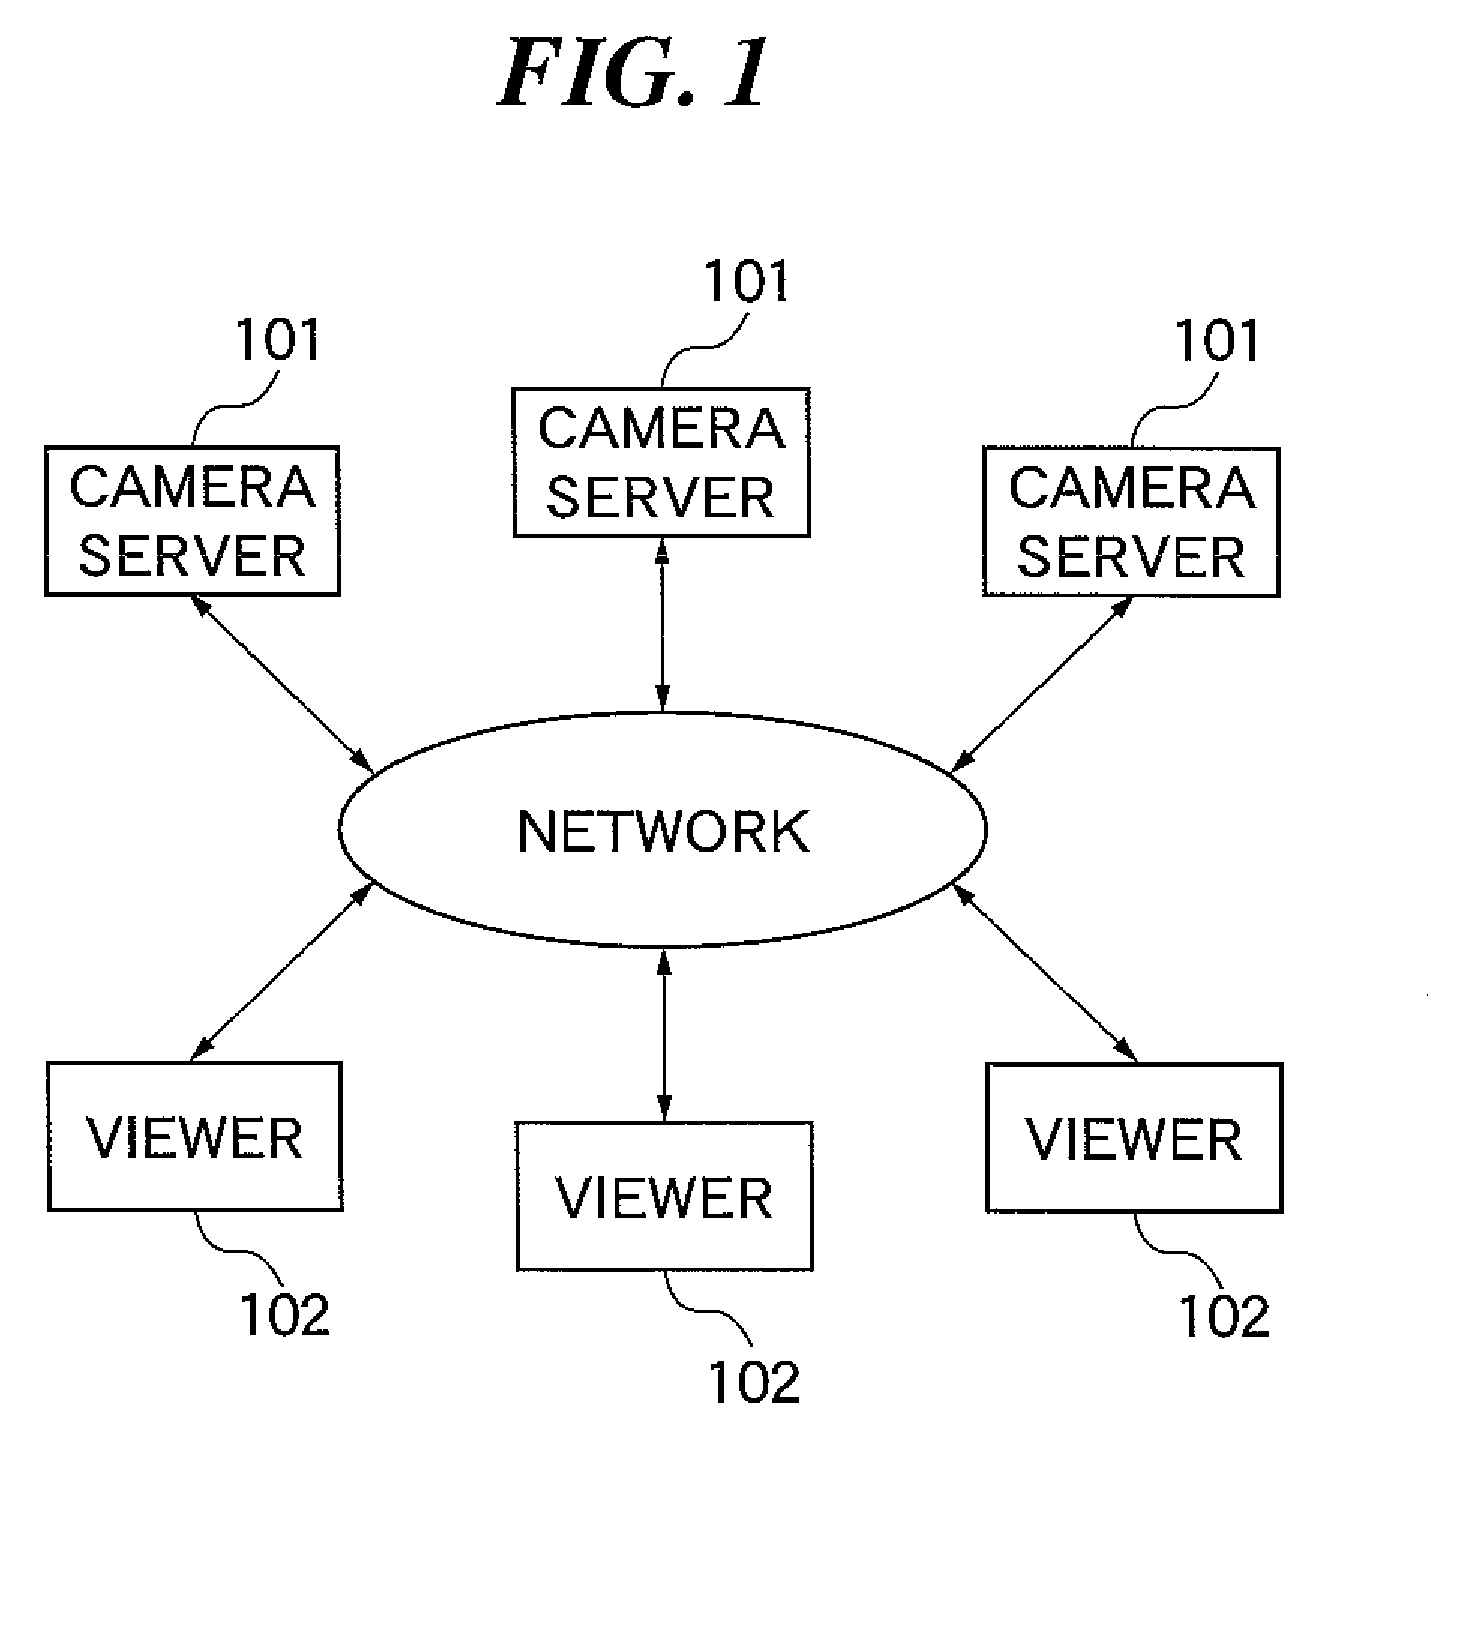 Video distribution apparatus, viewer apparatus, video distribution system including these apparatuses, control method for the video distribution apparatus, control method for the viewer apparatus, and computer program for the apparatuses